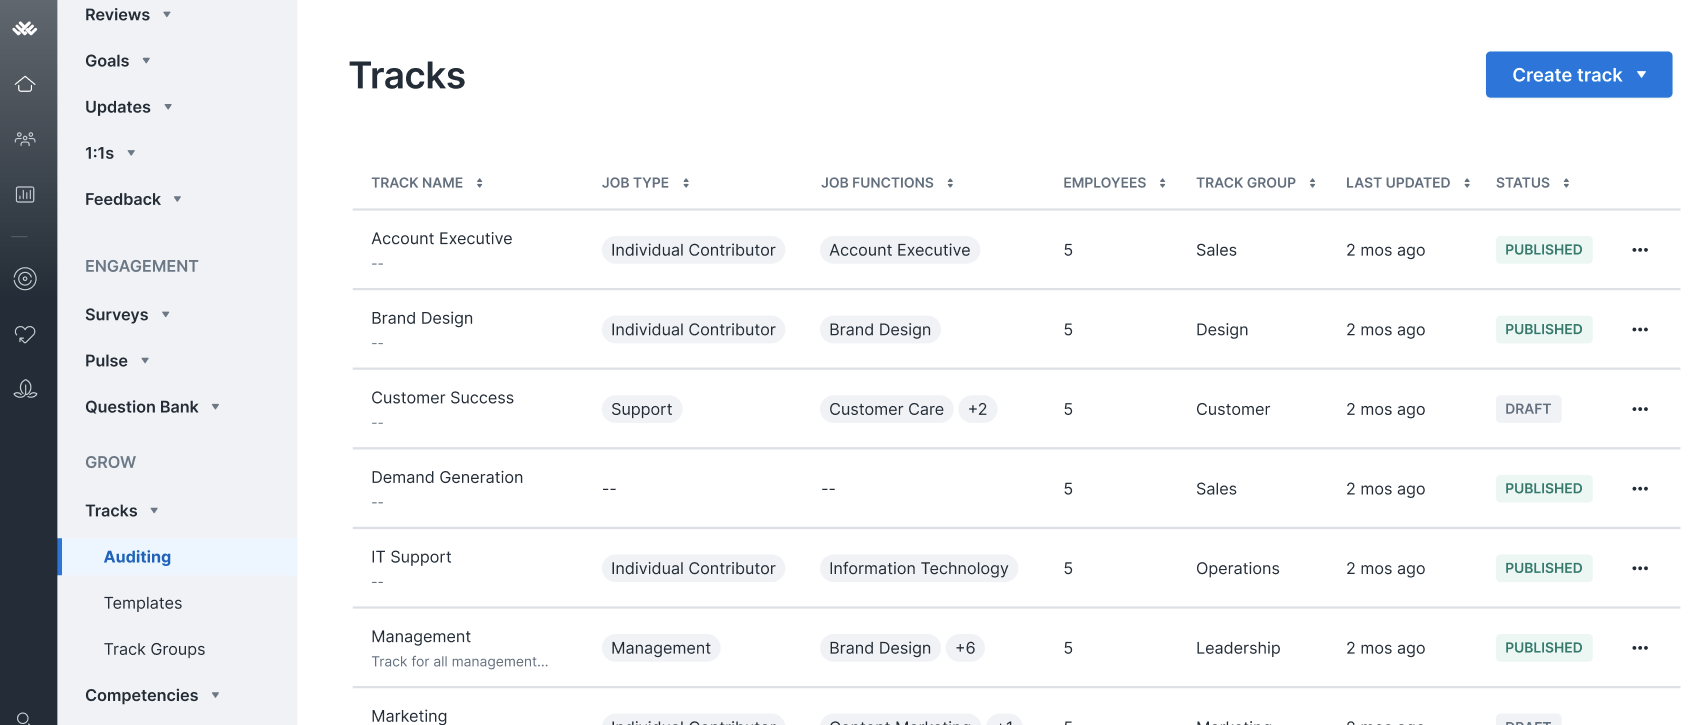 Image of Lattice Grow Auditing page where each Grow track has an associated job function and job type